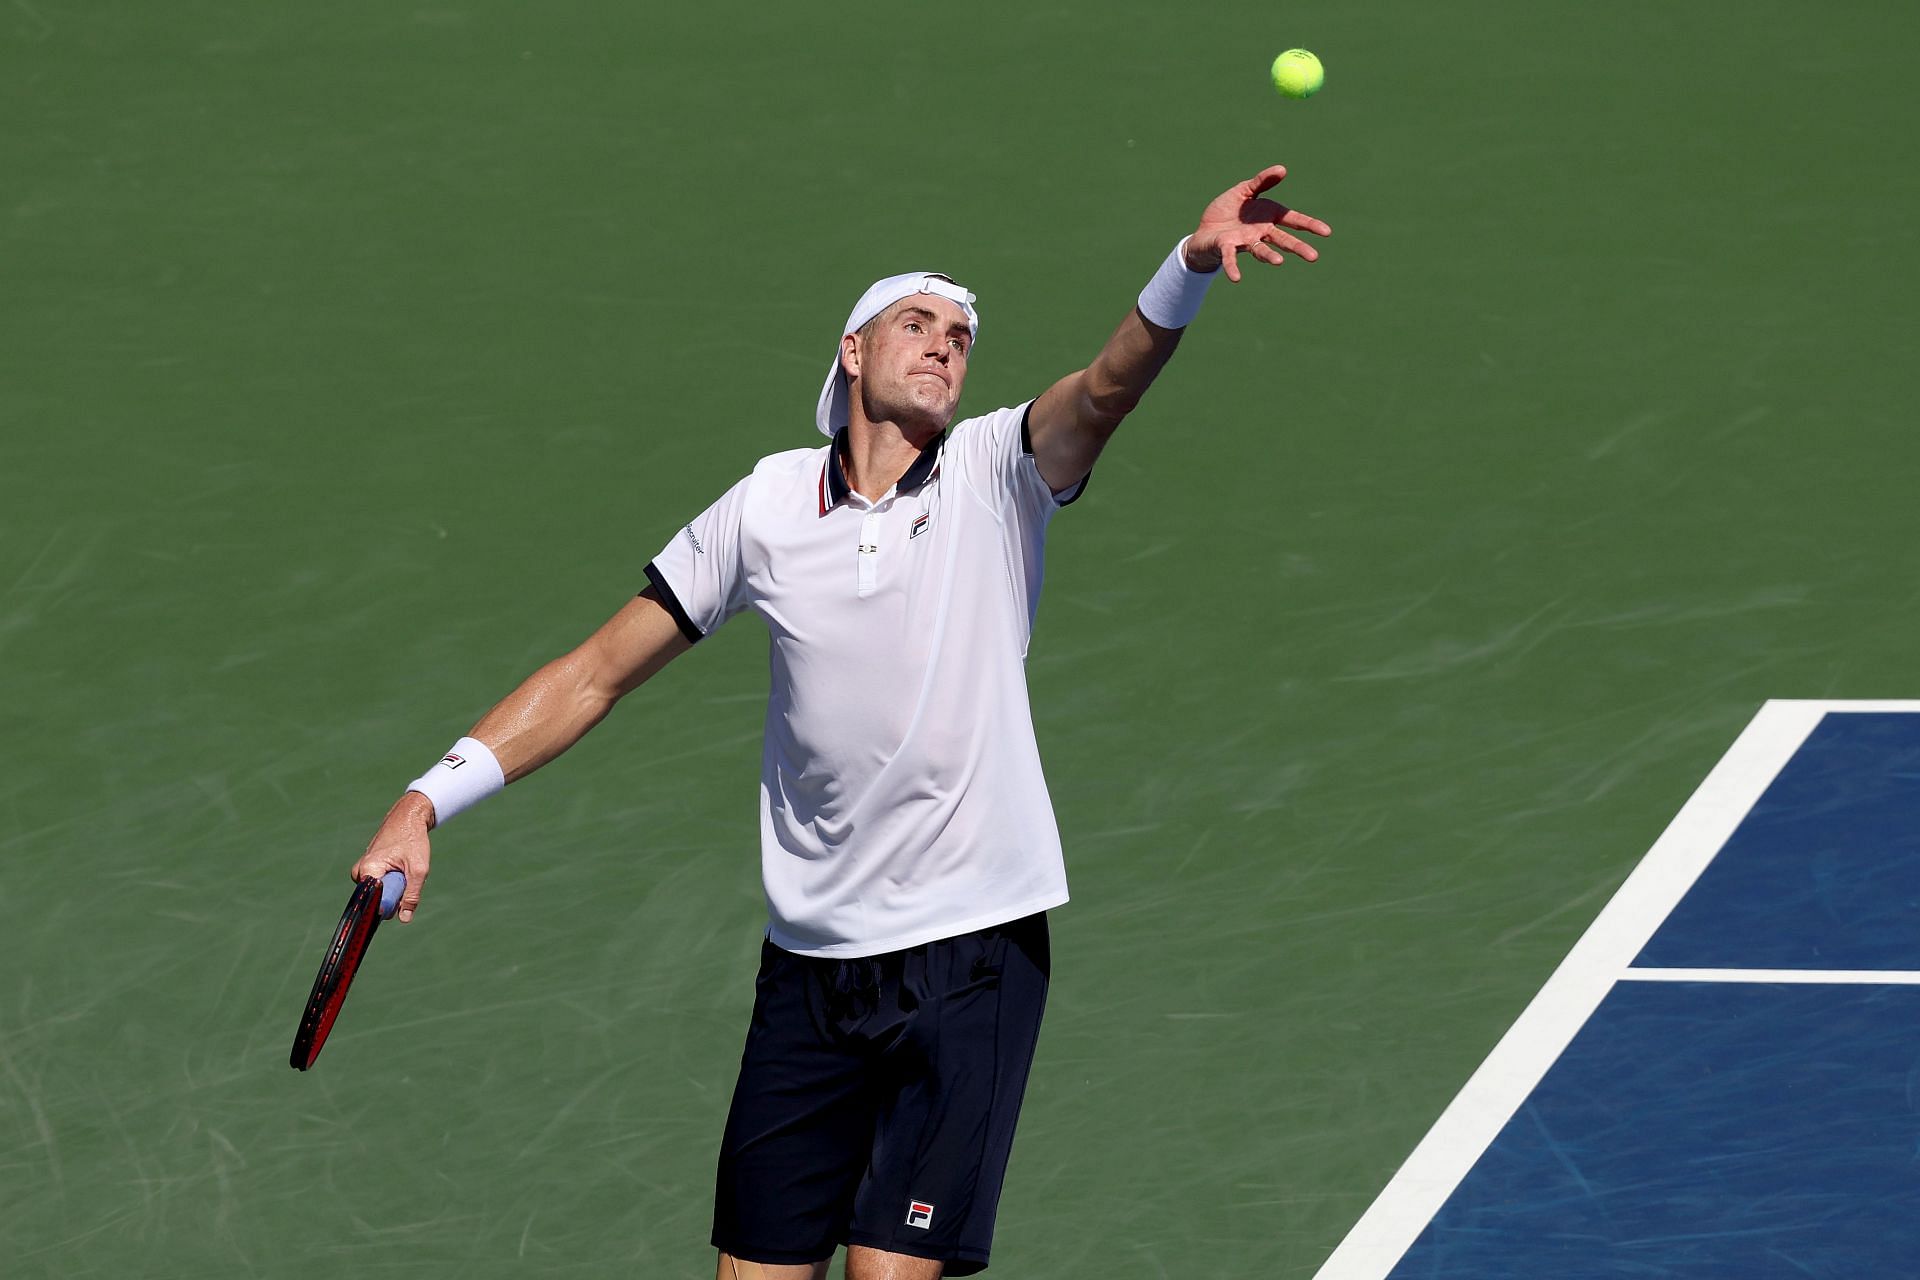 John Isner in action at the US Open